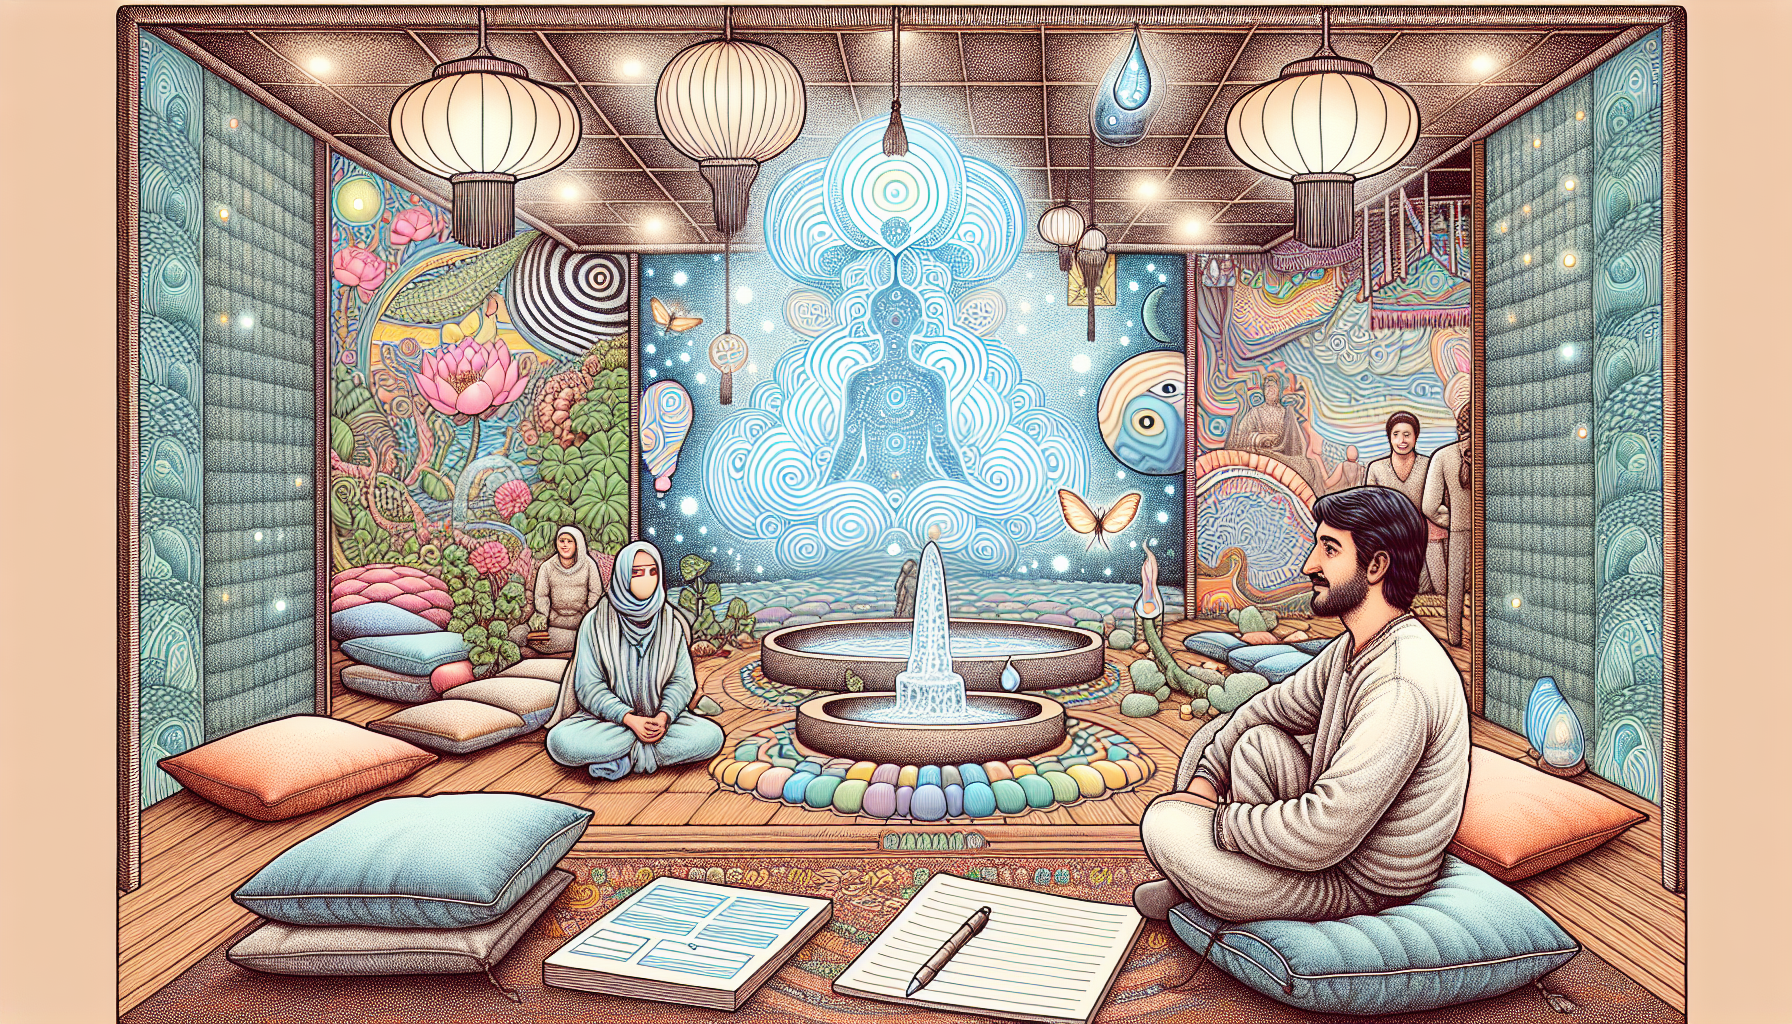 Illustration of managing the psychedelic experience